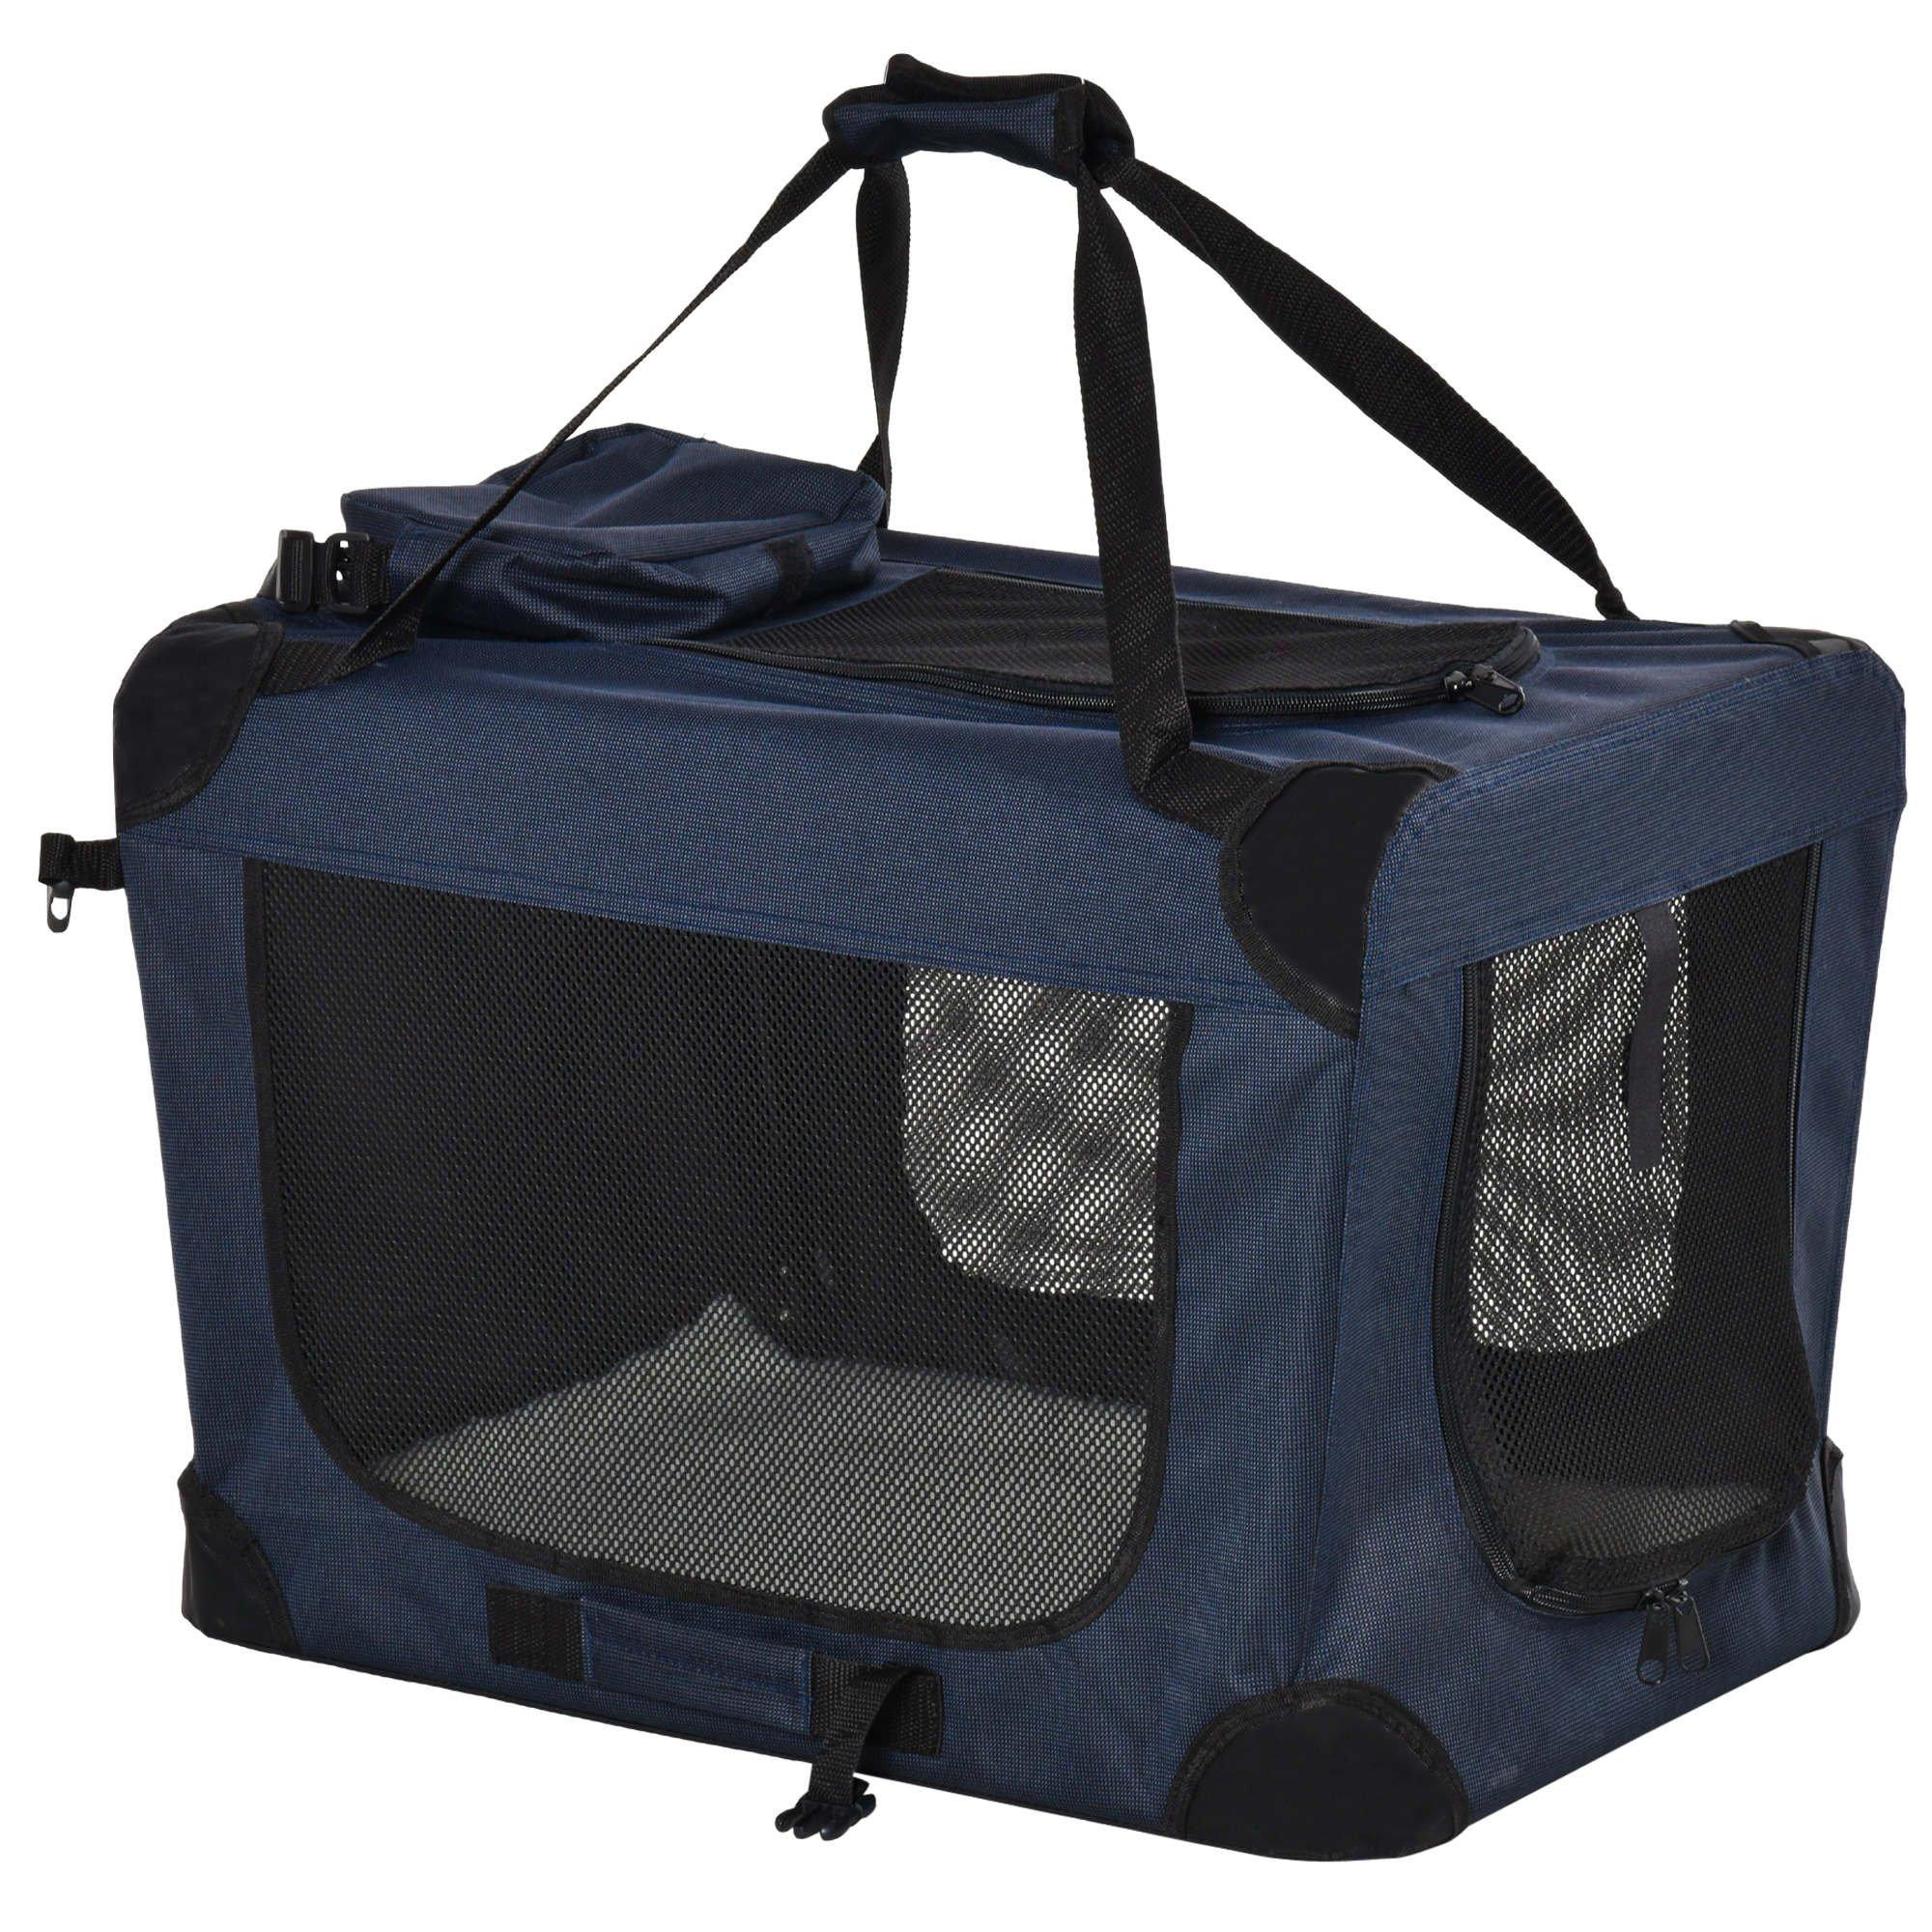 60cm Folding Pet Carrier Bag Soft Portable Cat Cage with Cushion Storage